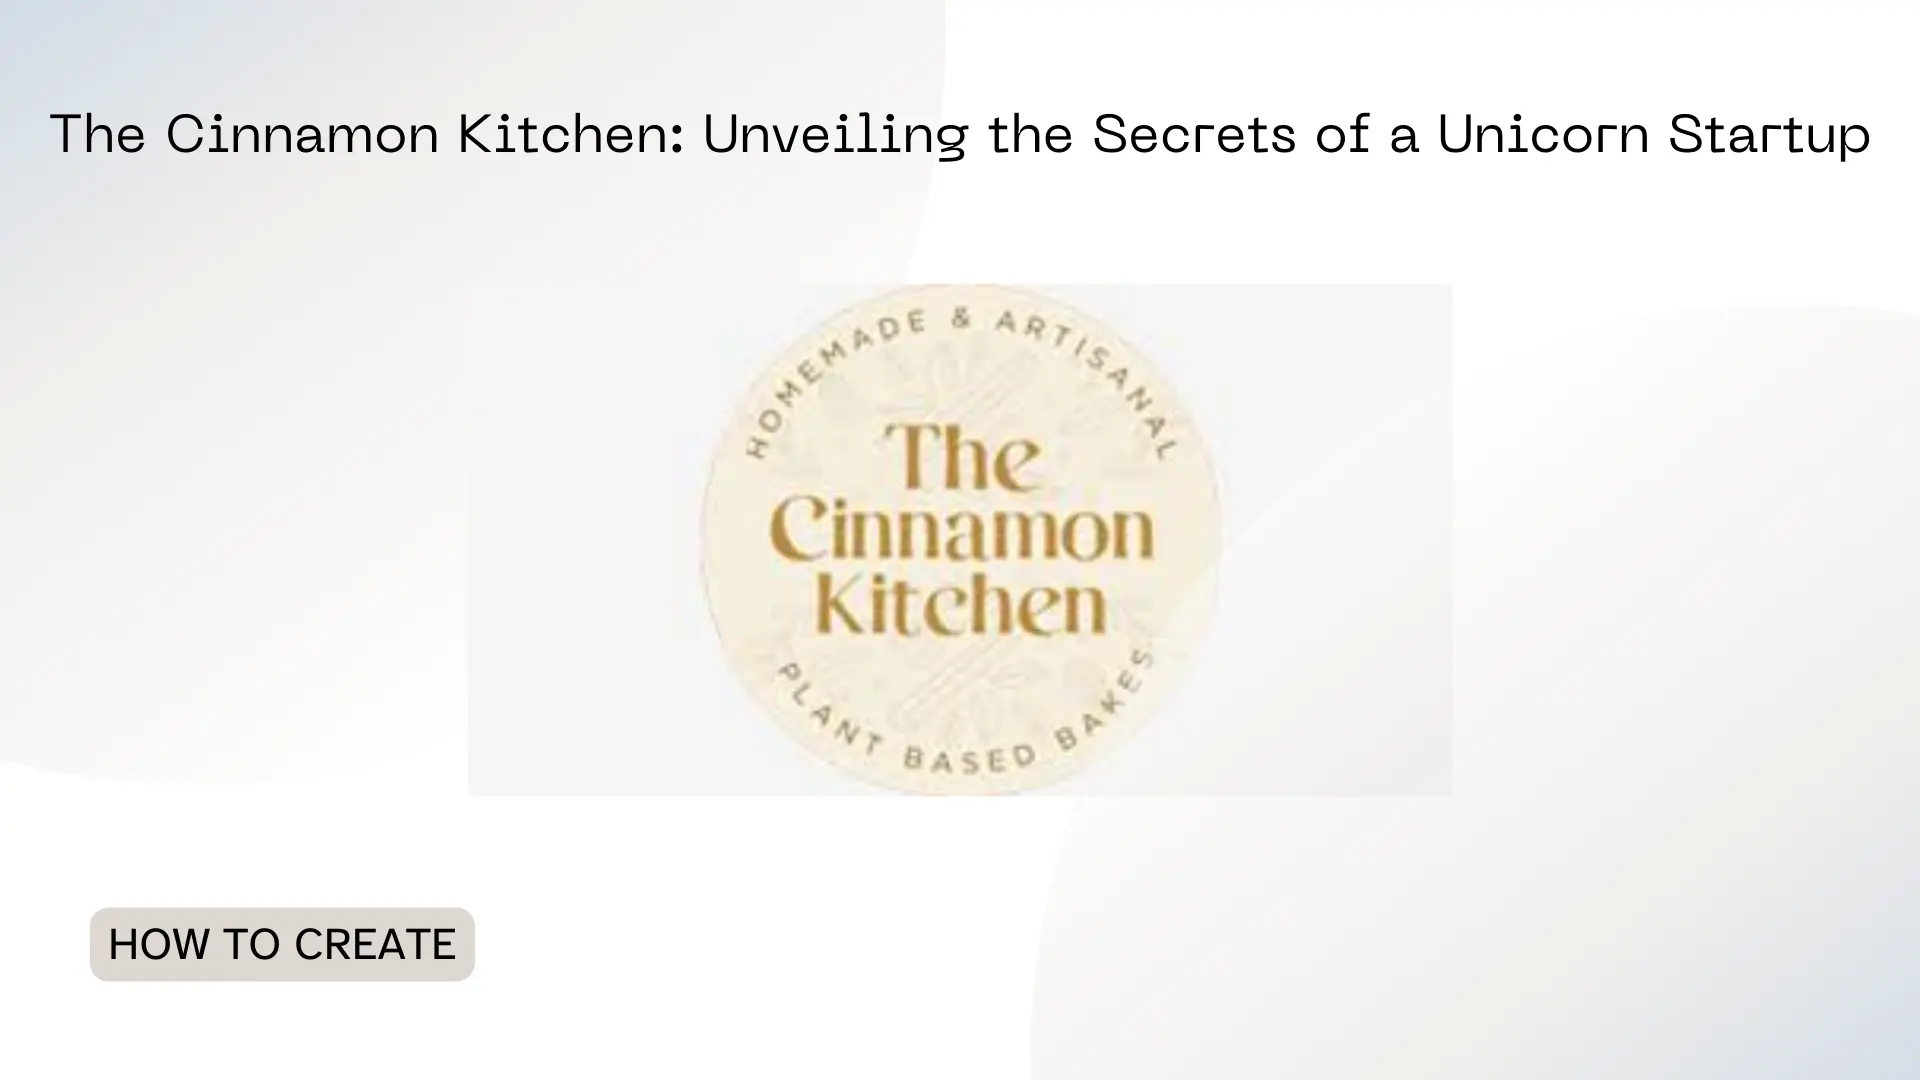 The Cinnamon Kitchen: Unveiling the Secrets of a Unicorn Startup